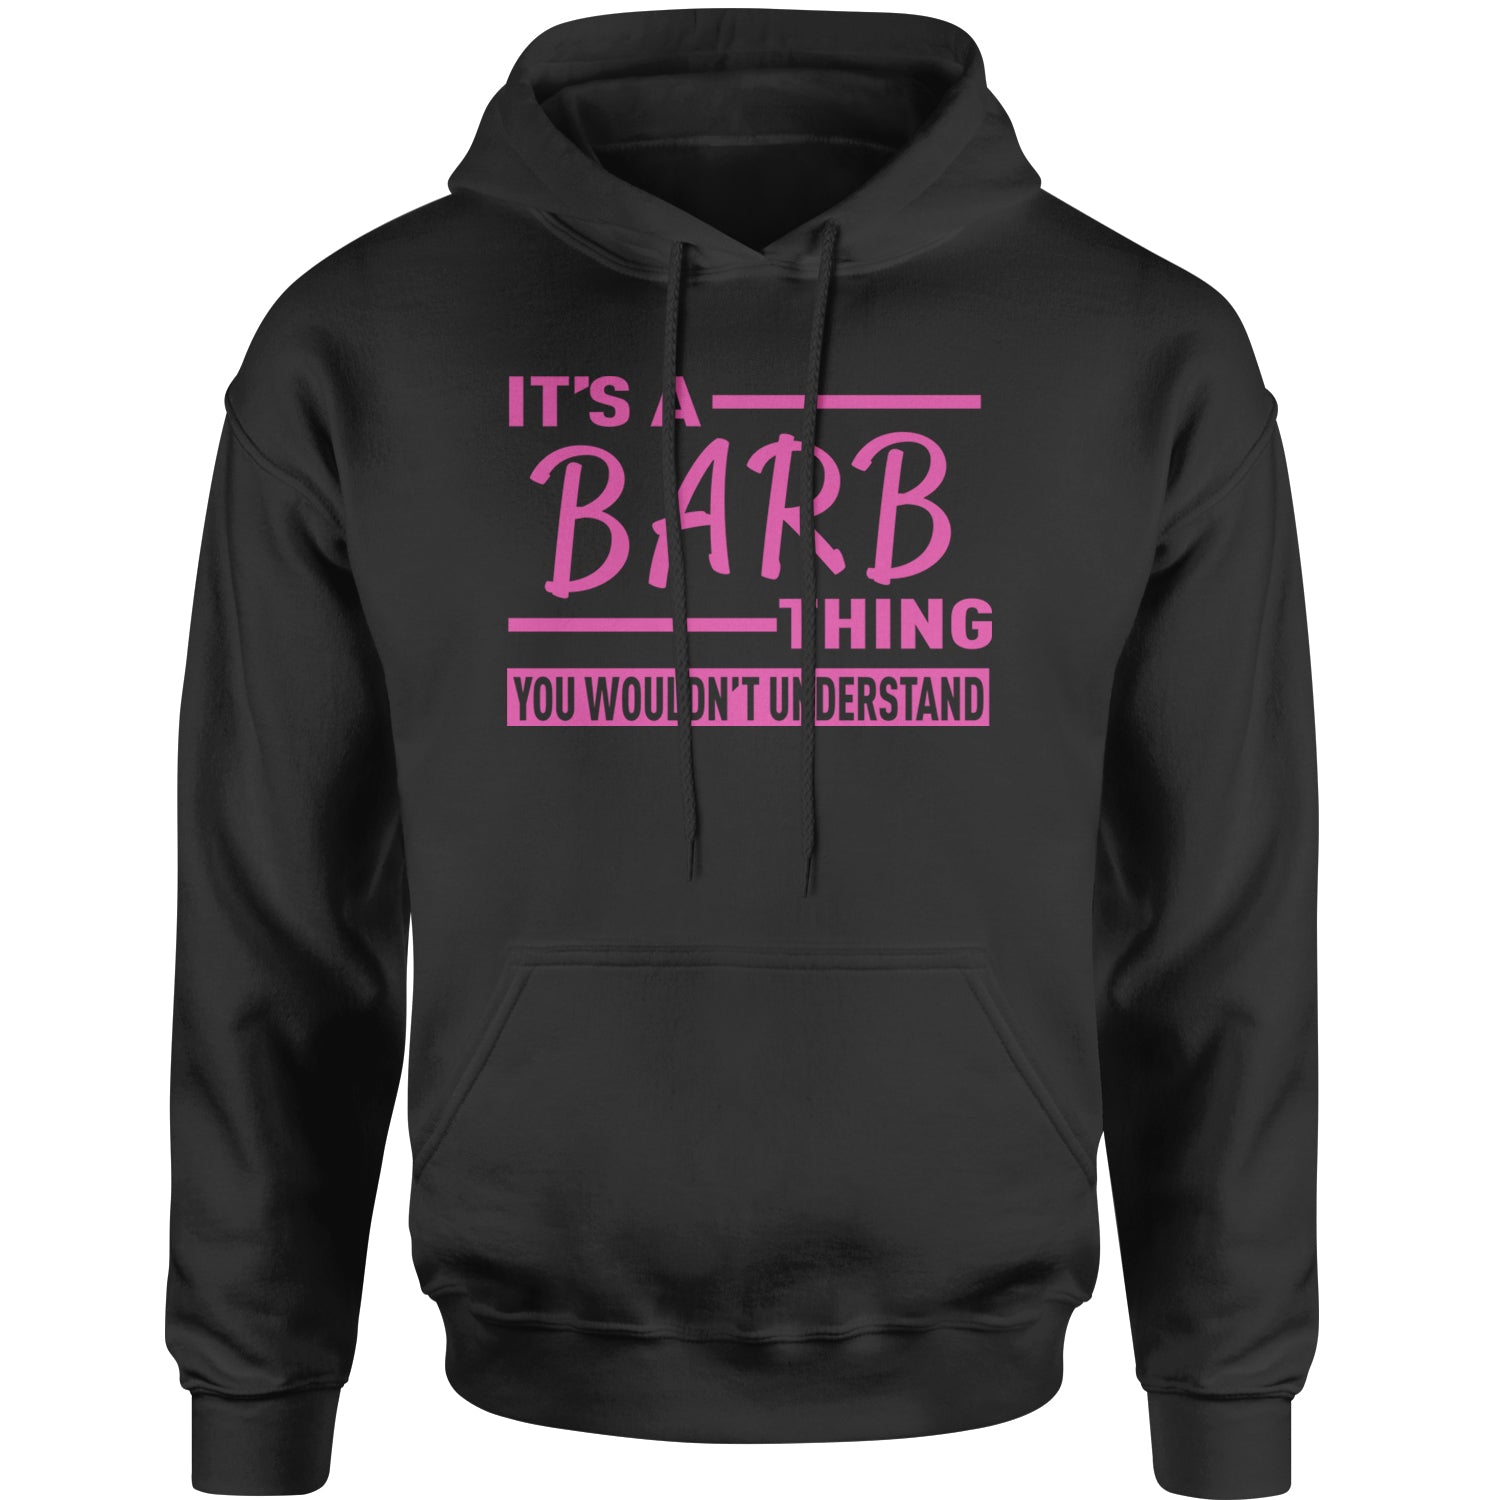 It's A Barb Thing, You Wouldn't Understand Adult Hoodie Sweatshirt